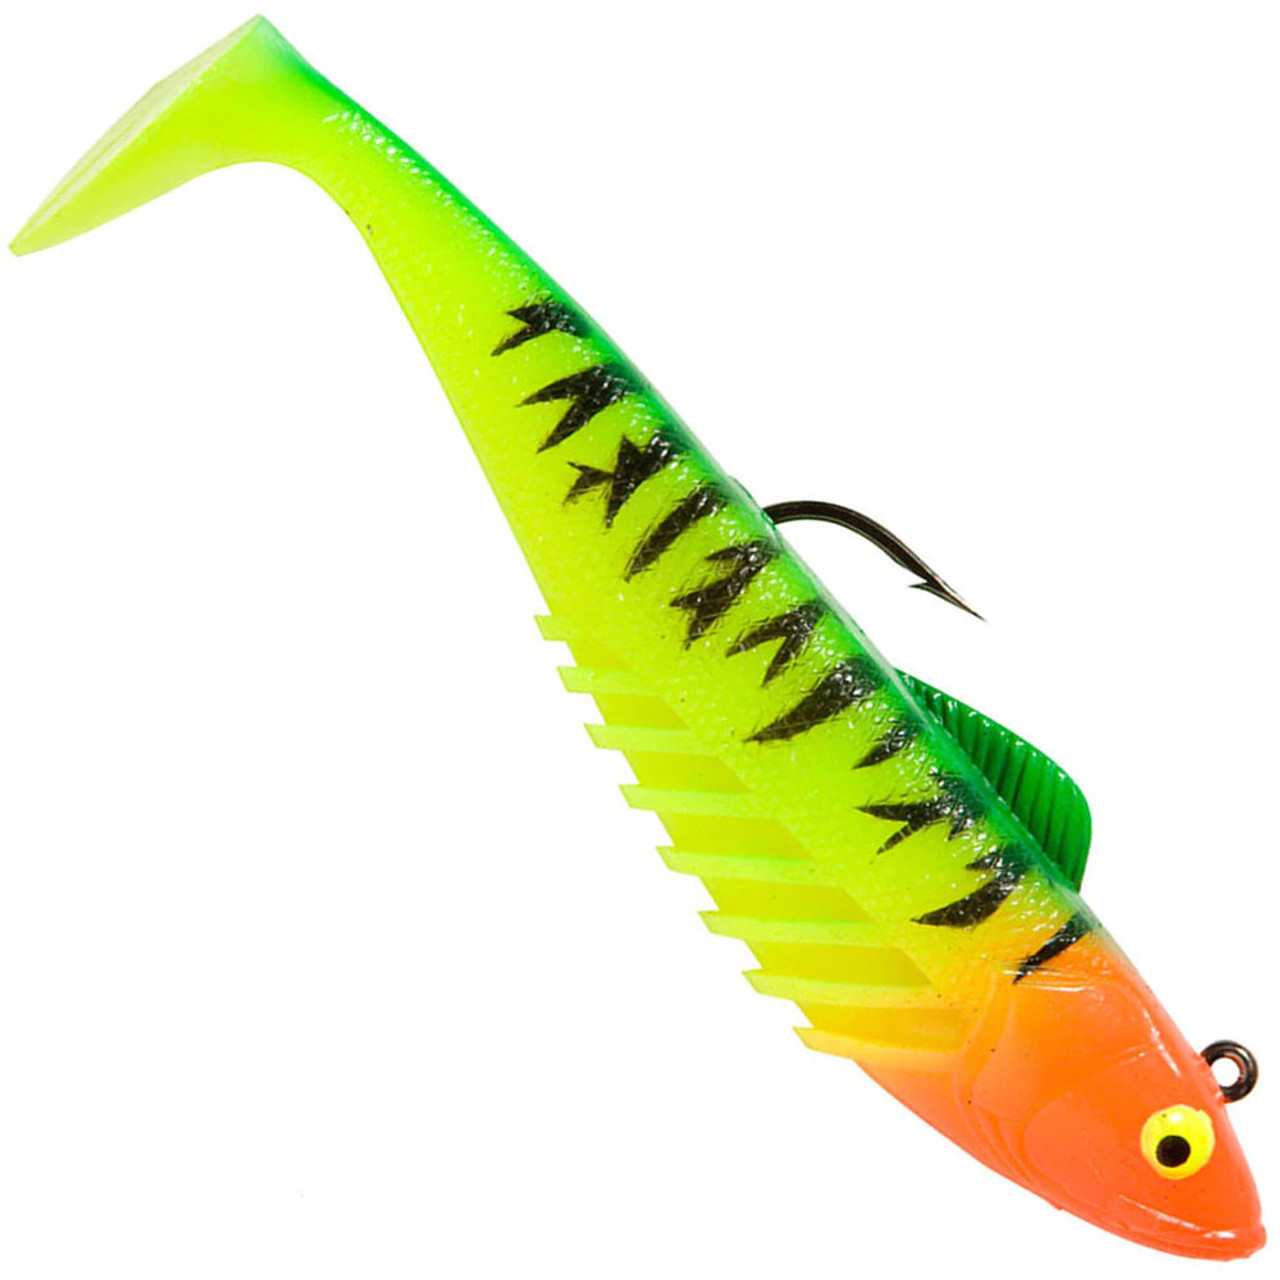 Squidgy Slick Rig Lures